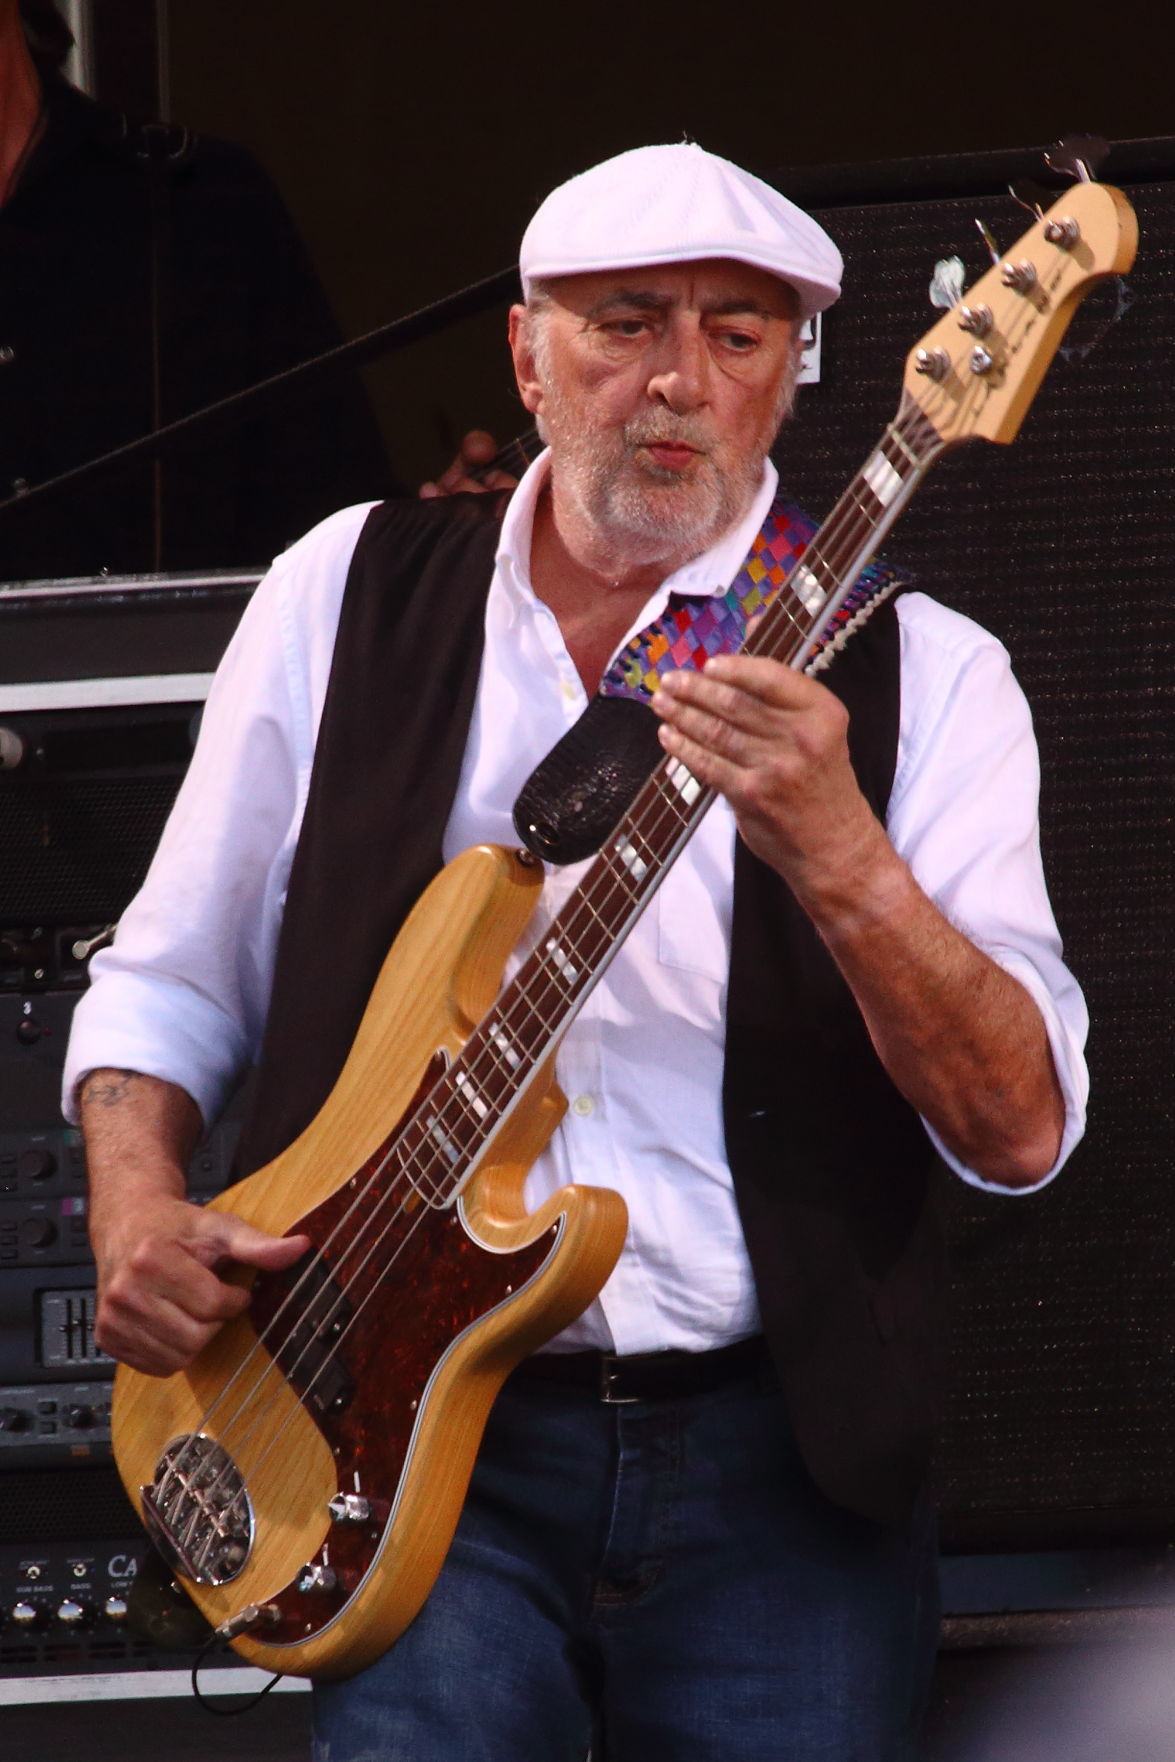 Happy Birthday John McVie!! The one and only bass player who puts the Mac in FleetwoodMac.  